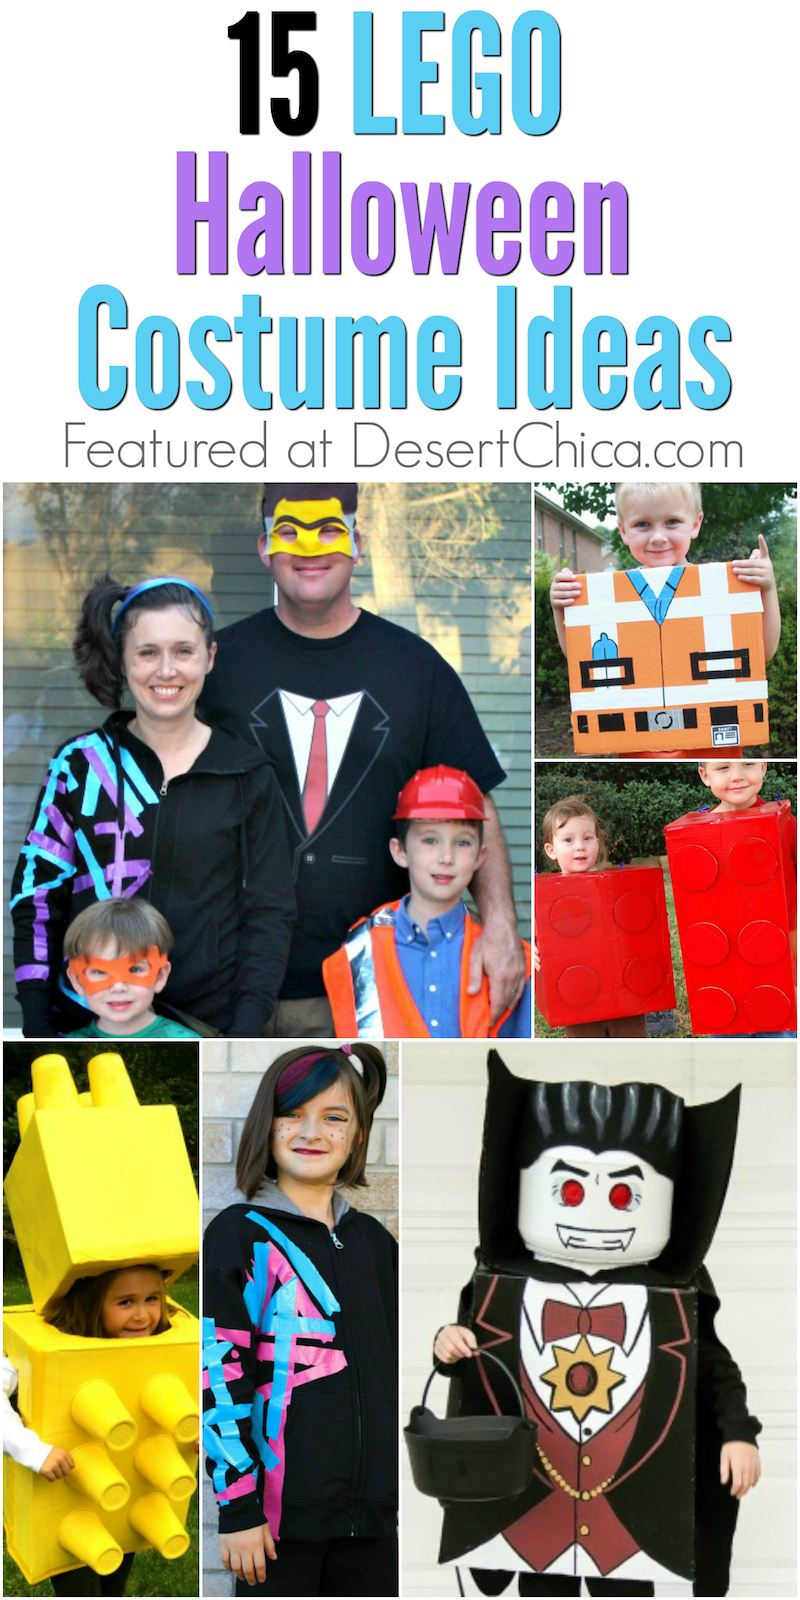 Are your kids LEGO crazy like mine? If so, check out these awesome LEGO costume ideas for Halloween. There are lots of LEGO characters to choose from!